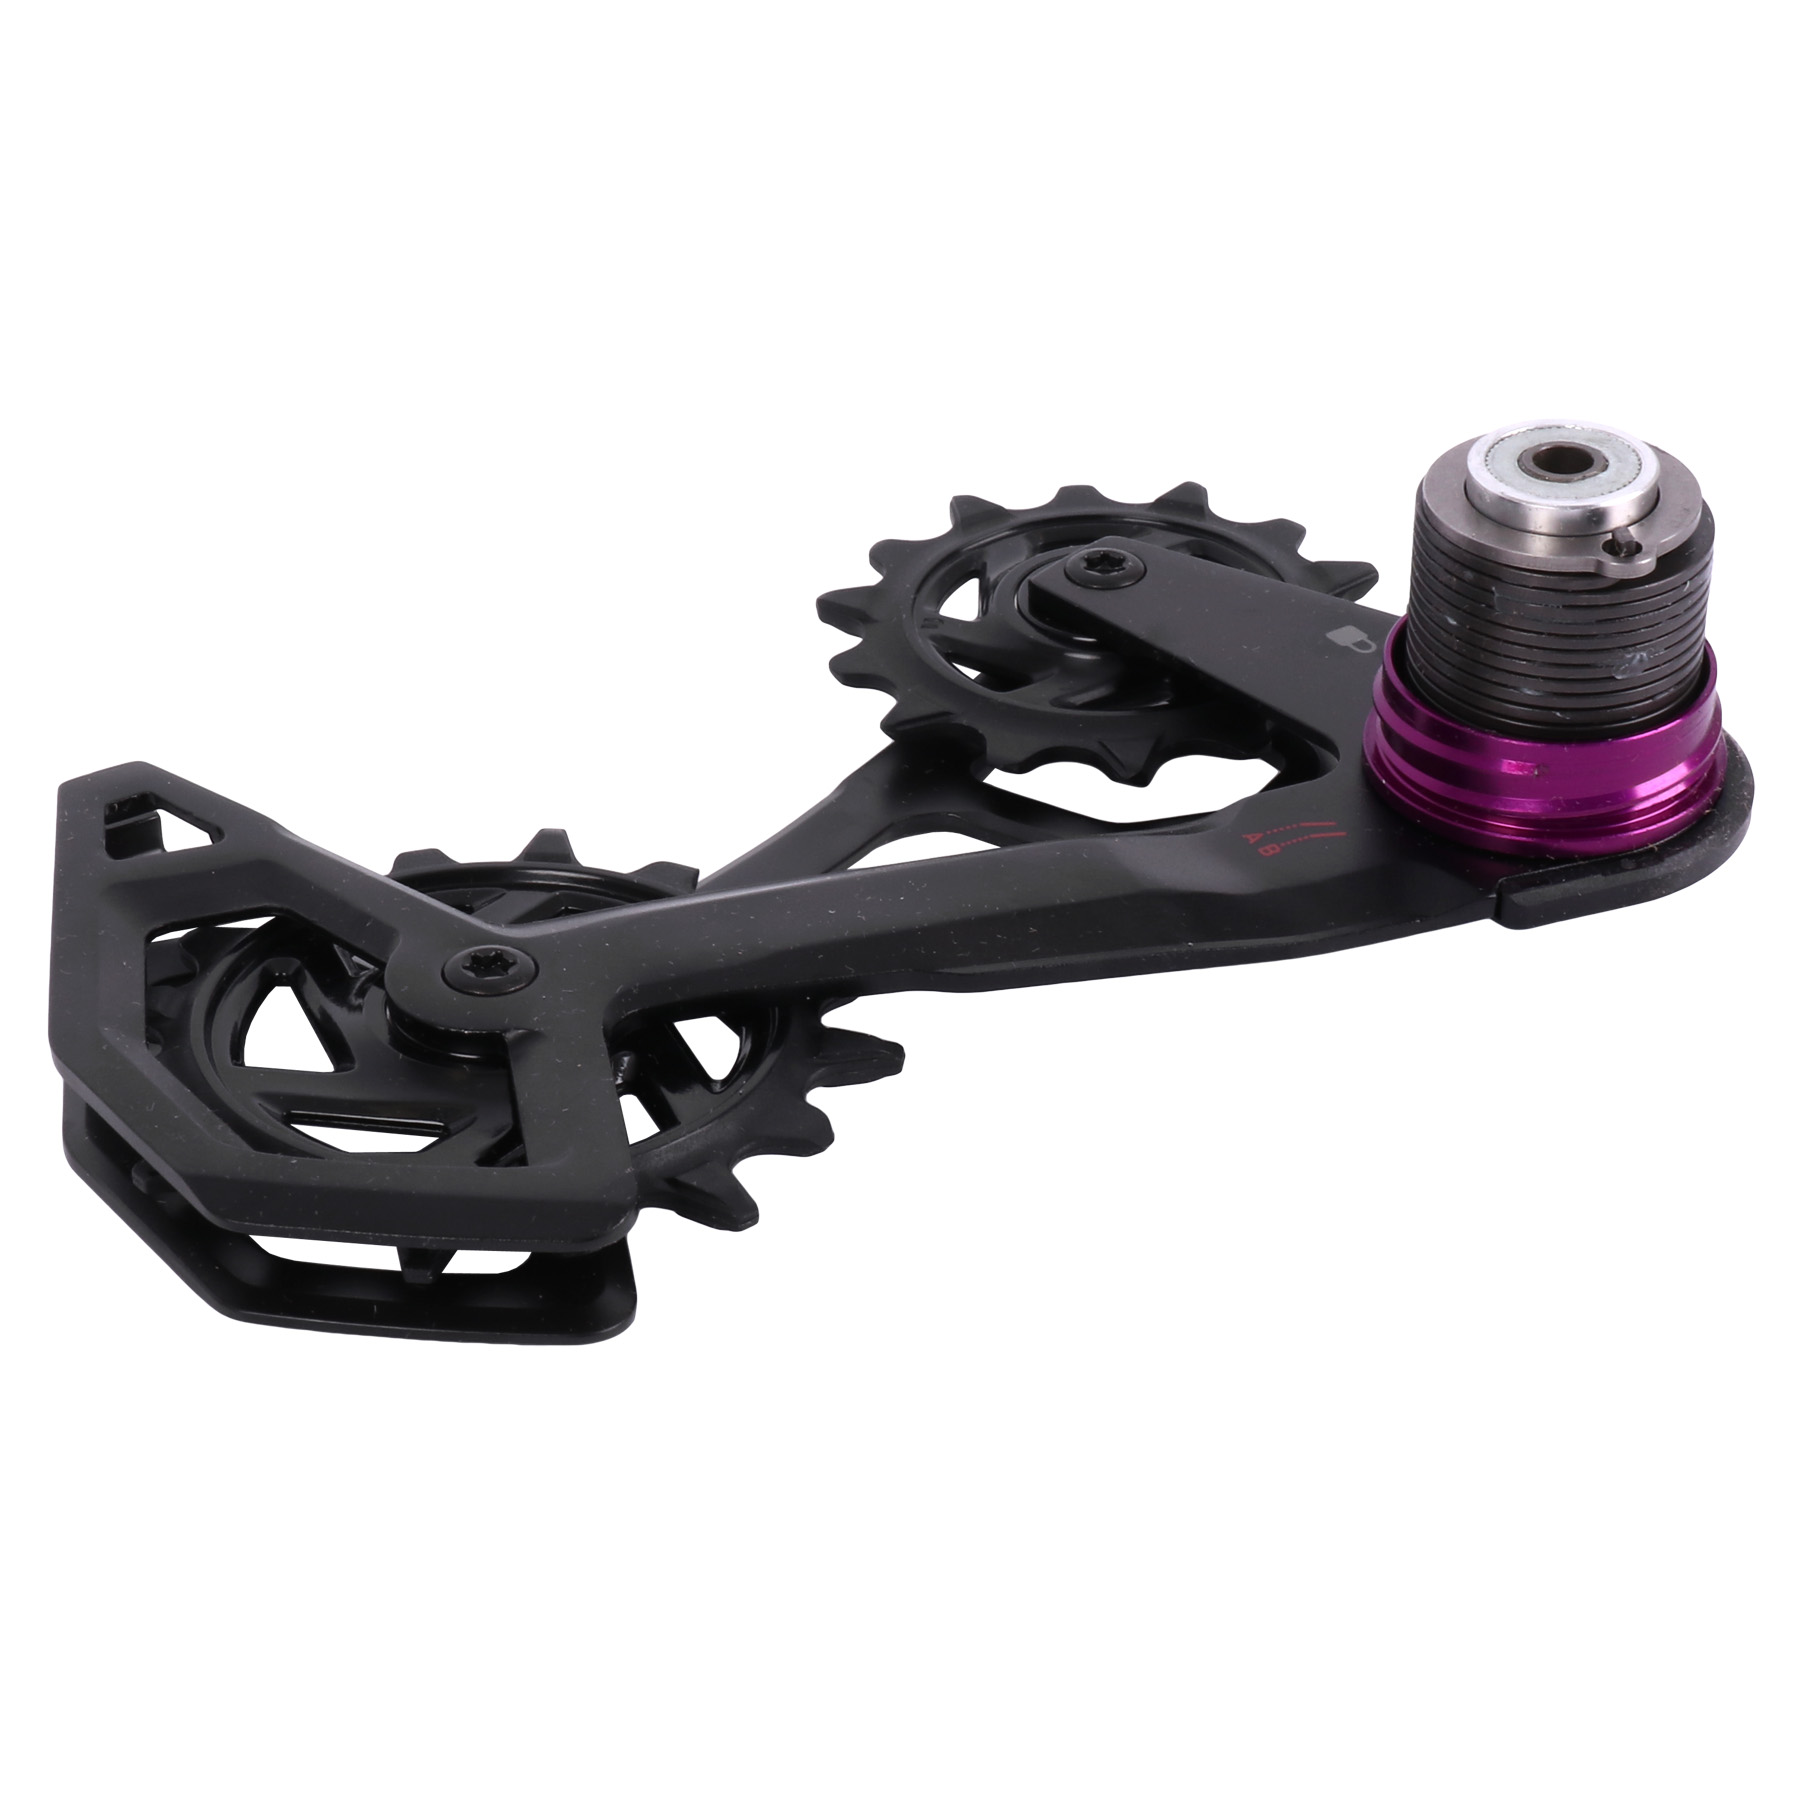 Picture of SRAM Cage Assembly Kit for GX Eagle Rear Derailleur - AXS | T-Type | B1 - 11.7518.104.019